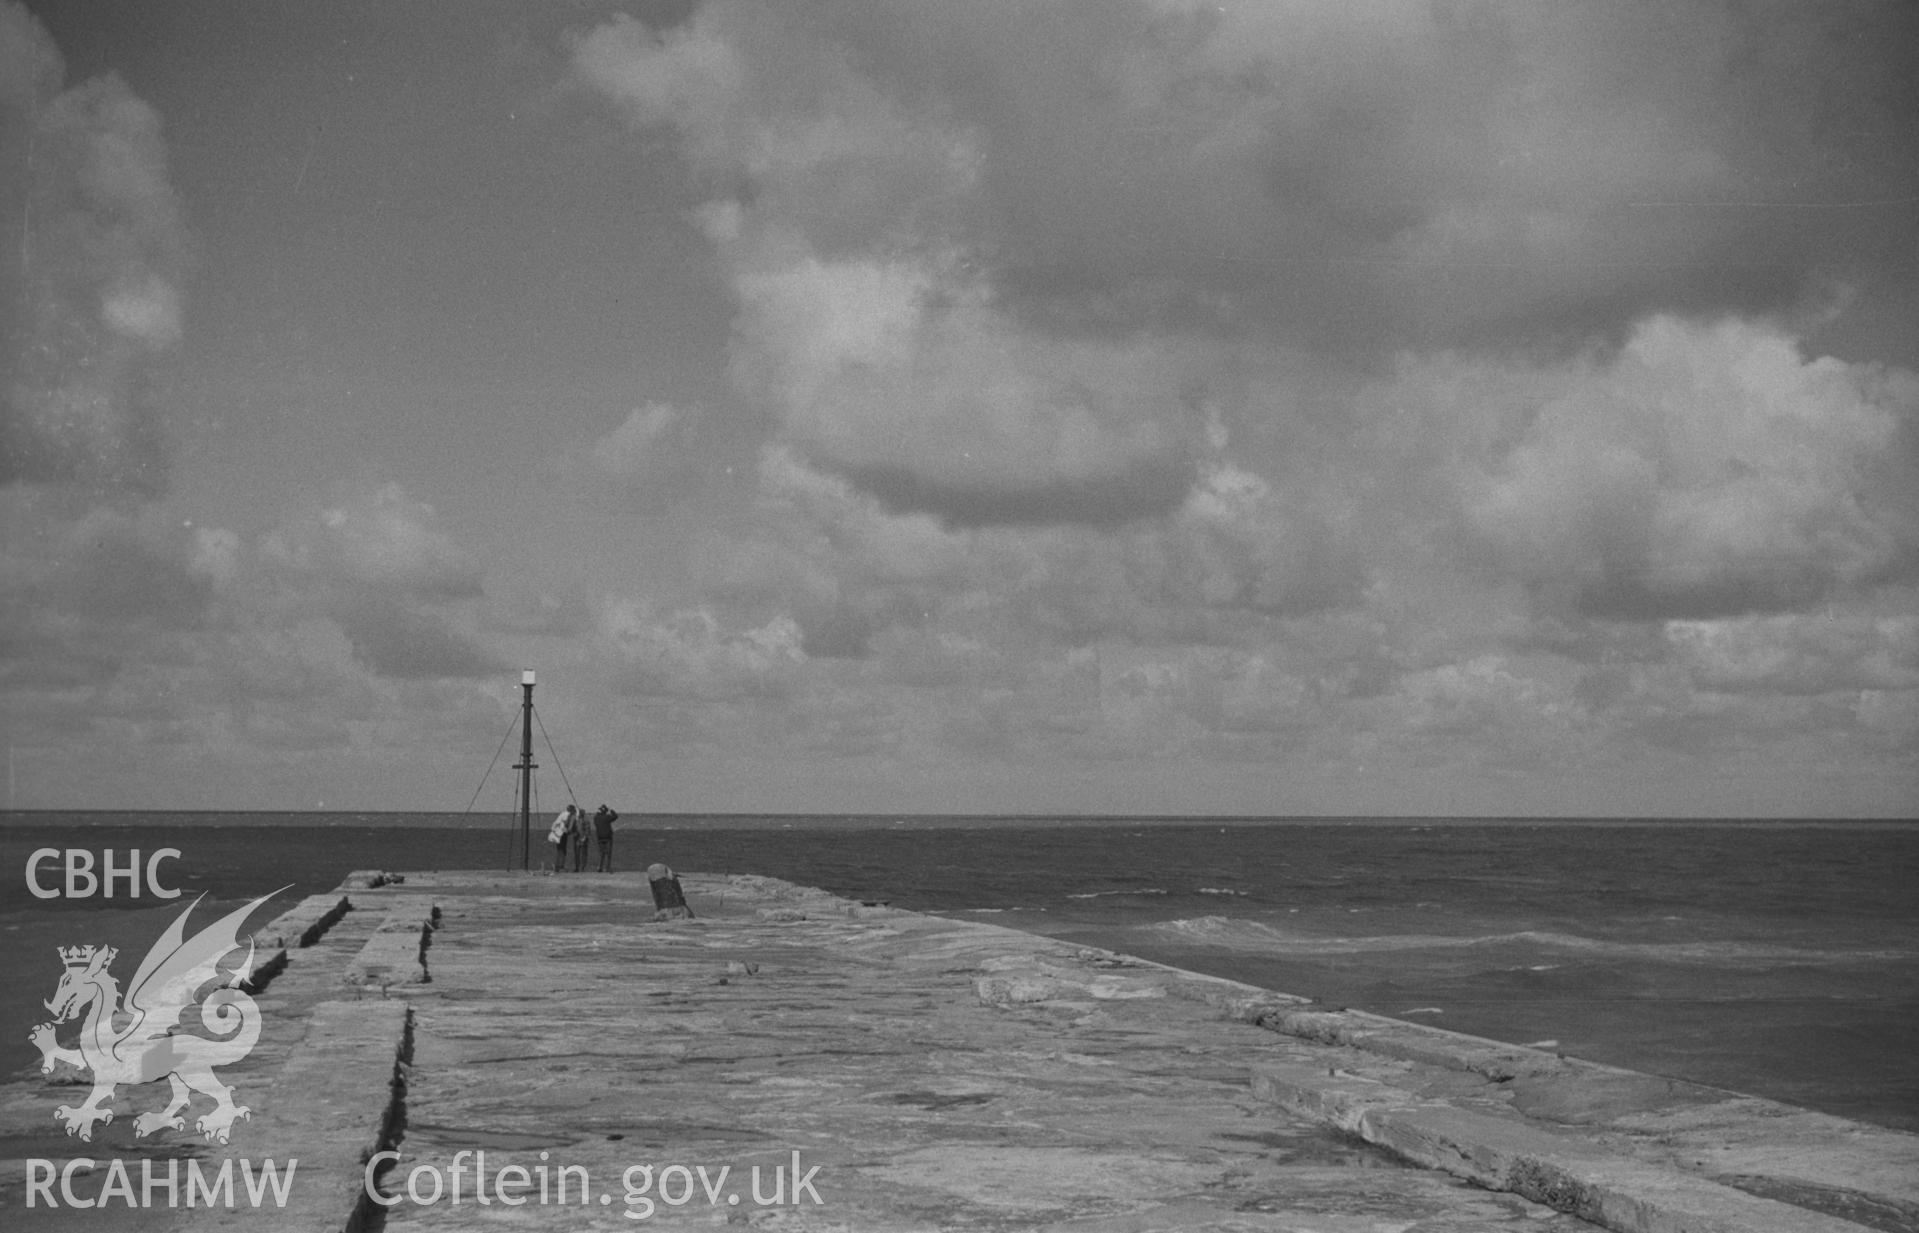 Digital copy of a black and white negative showing view from Tanybwlch pier, Aberystwyth. Photographed by Arthur O. Chater in September 1964 from Grid Reference SN 5785 8078. (Panorama. Photograph 1 of 10).